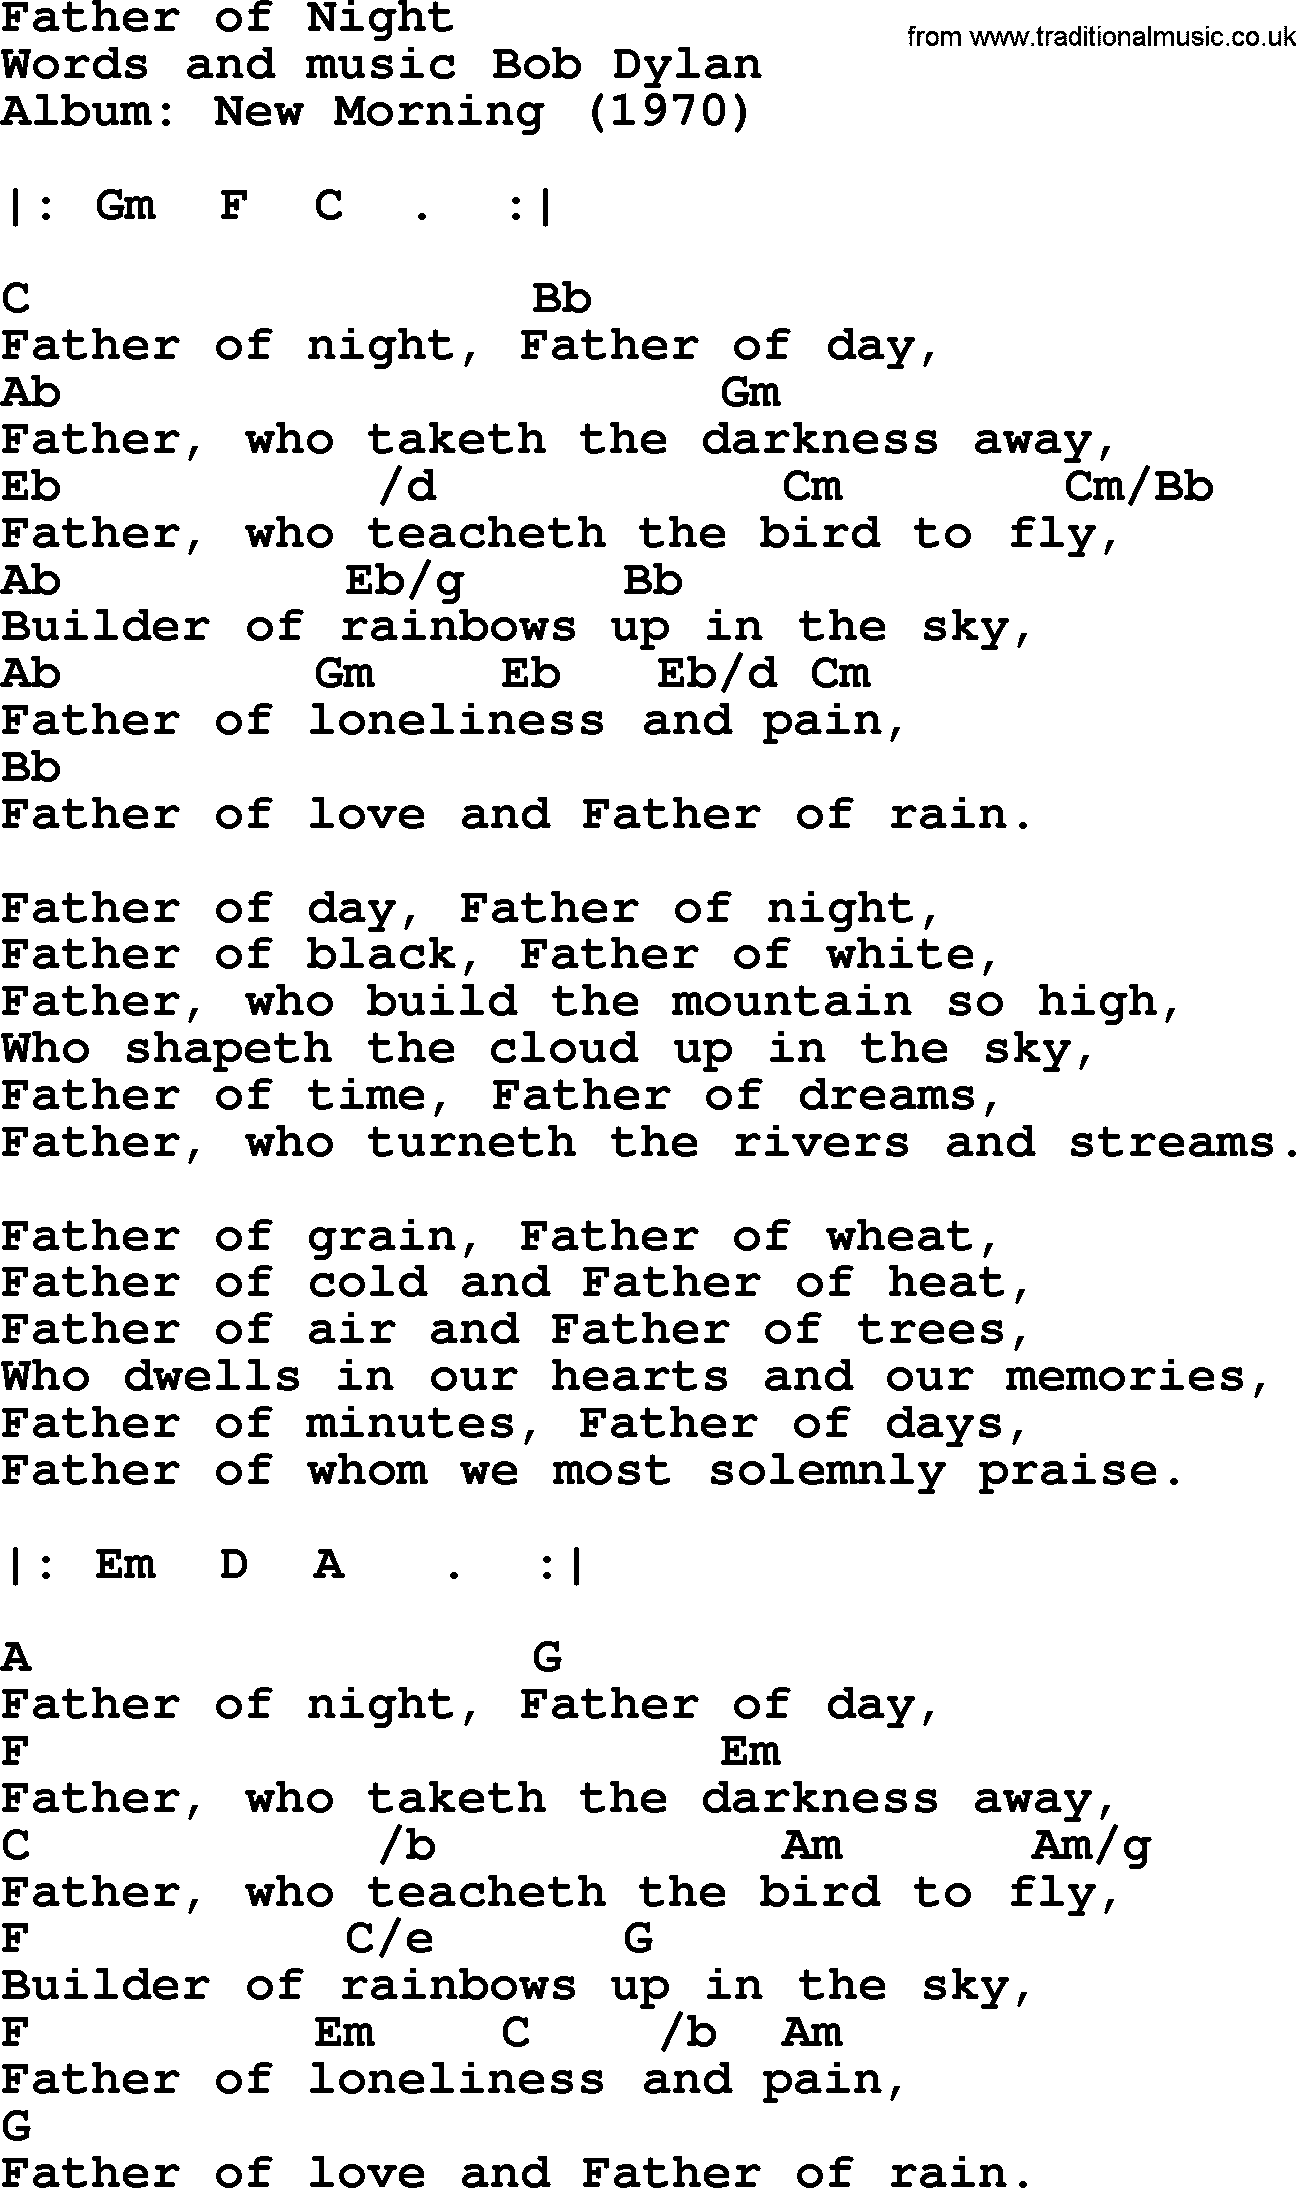 Bob Dylan song, lyrics with chords - Father of Night